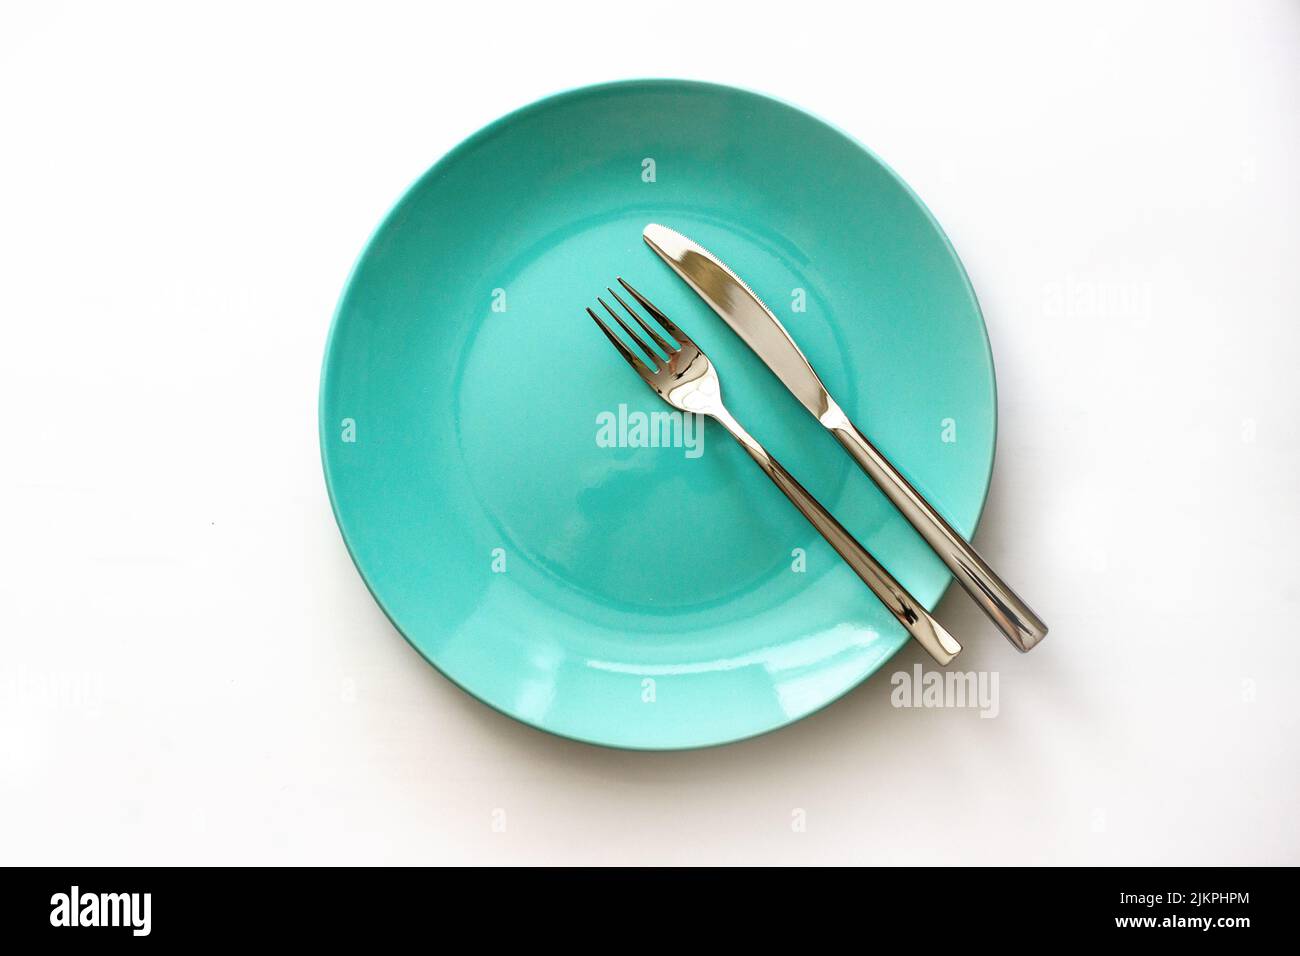 Served plate with cutlery. Empty green plate and stainless knife and fork isolated on white background. Top view. Stock Photo